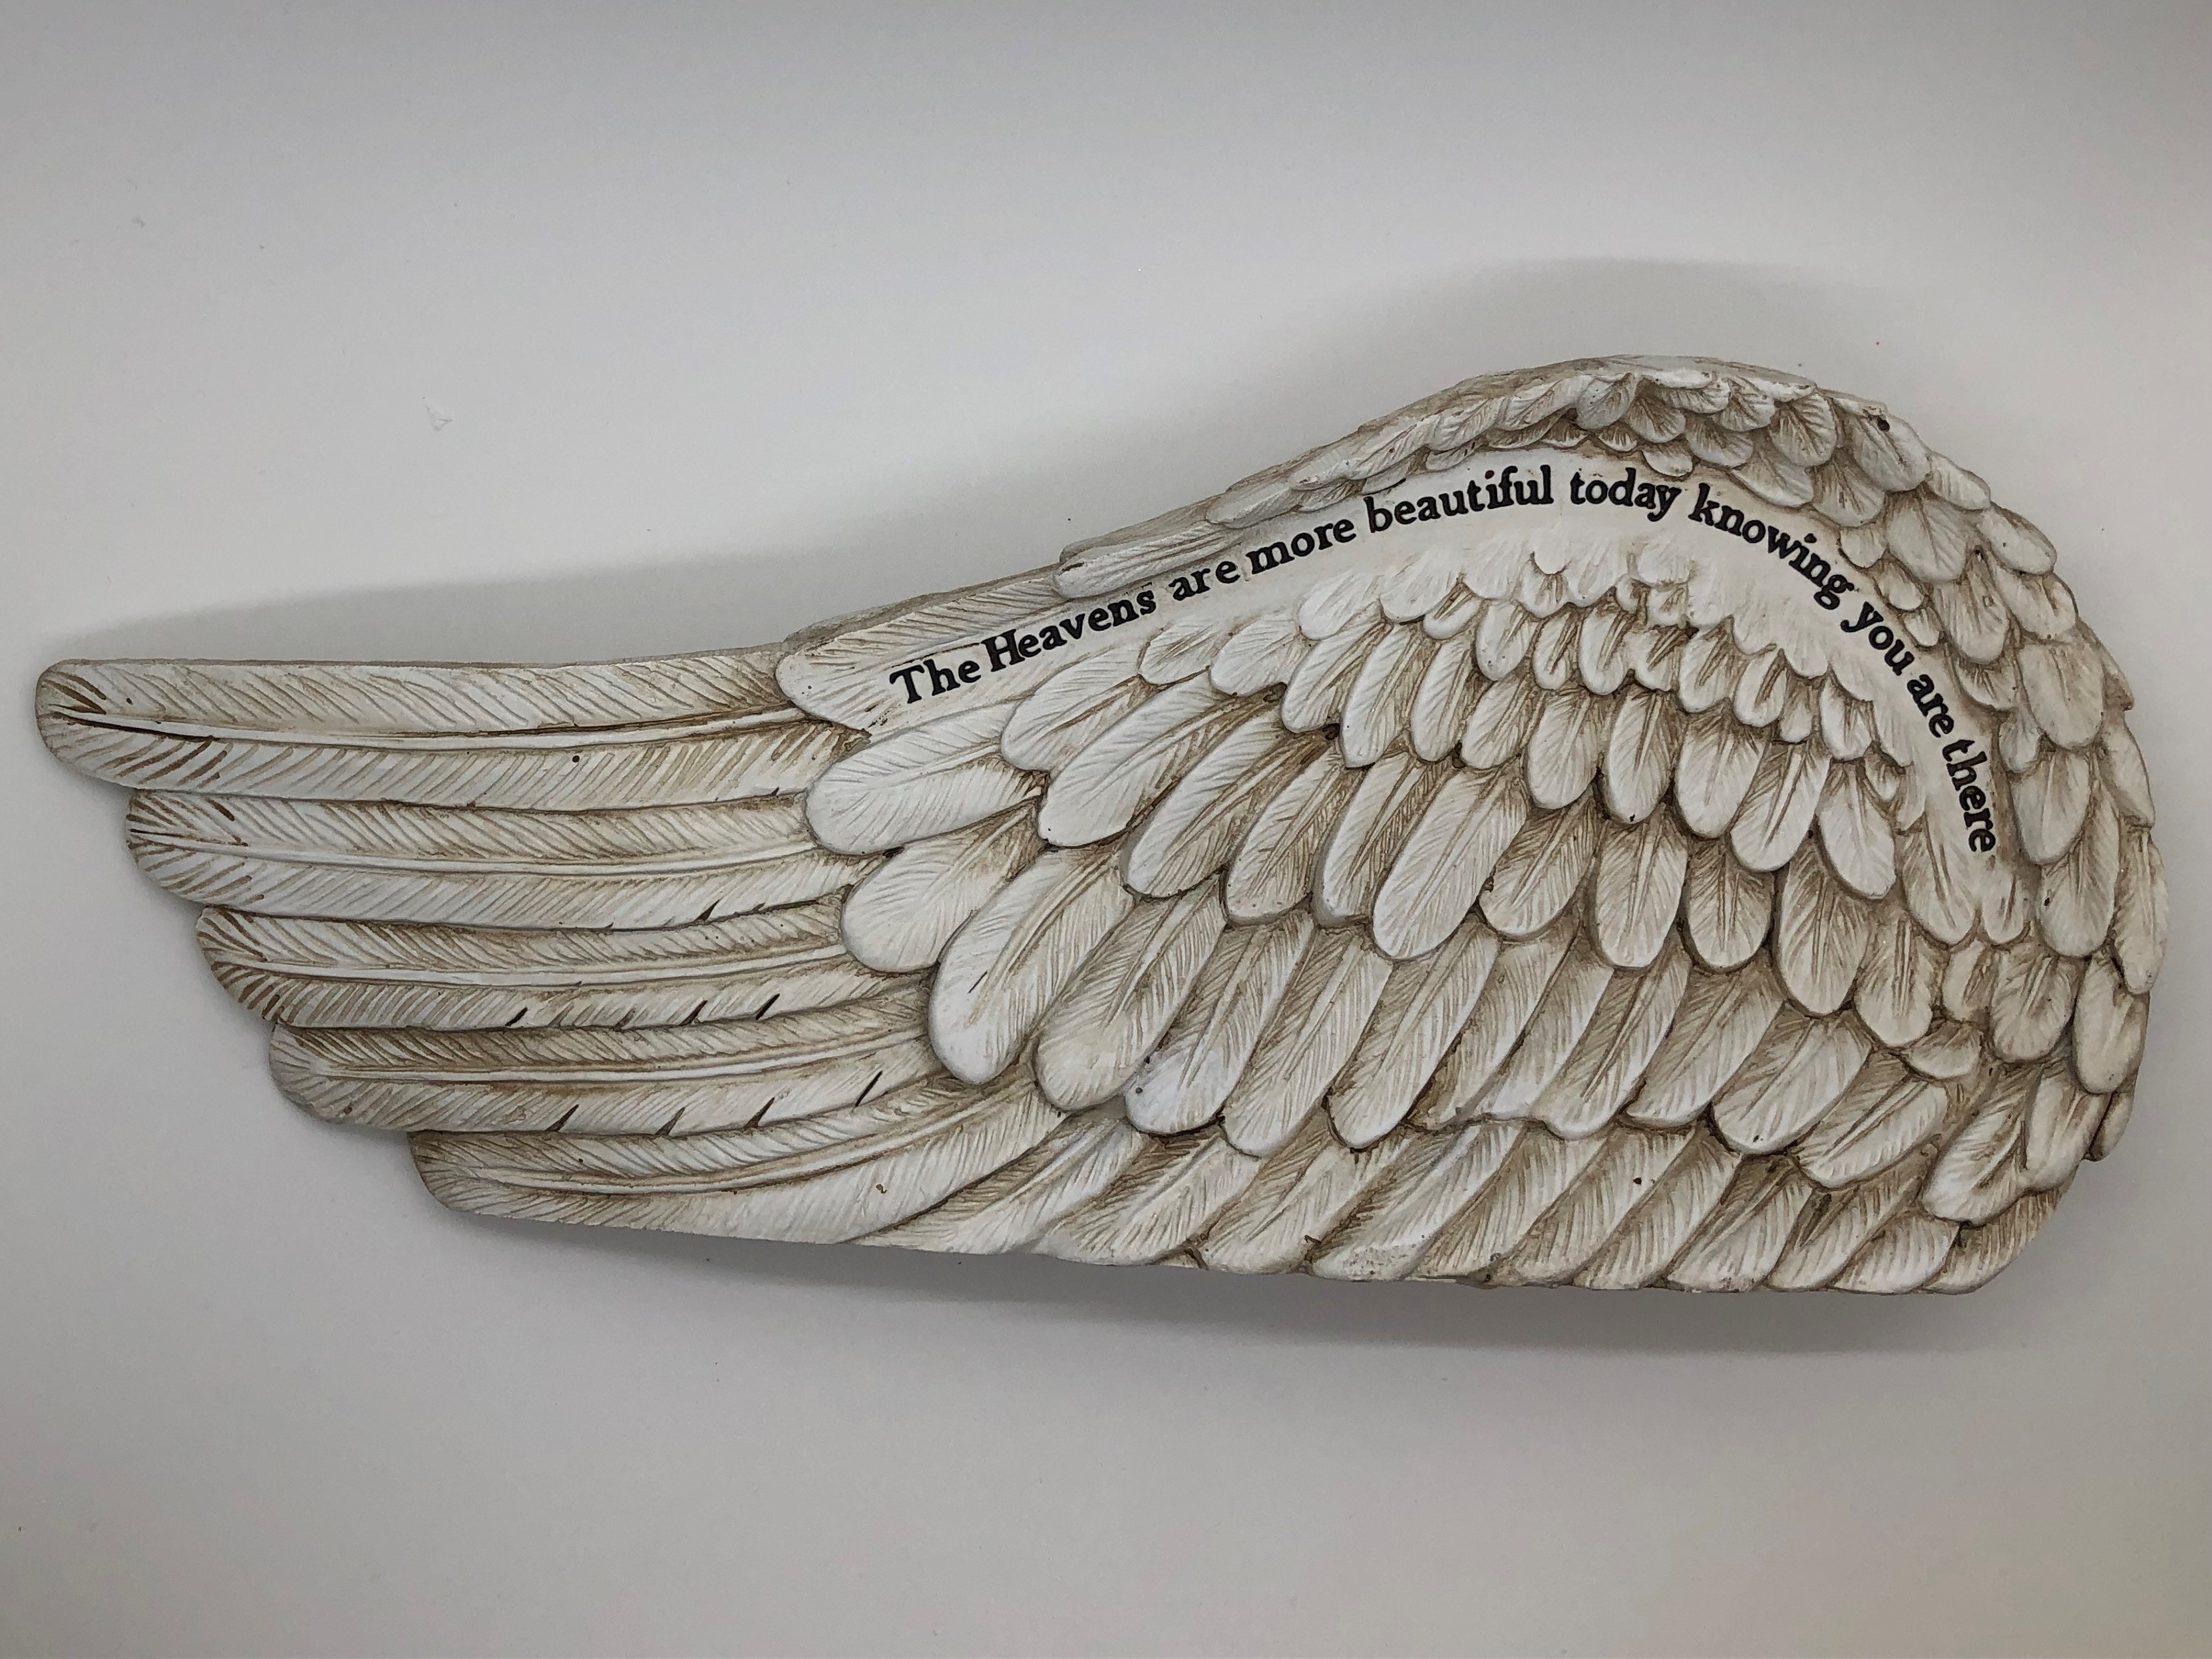 Antique Finished Angel Wing ~ The Heavens are more beautiful knowing you are there